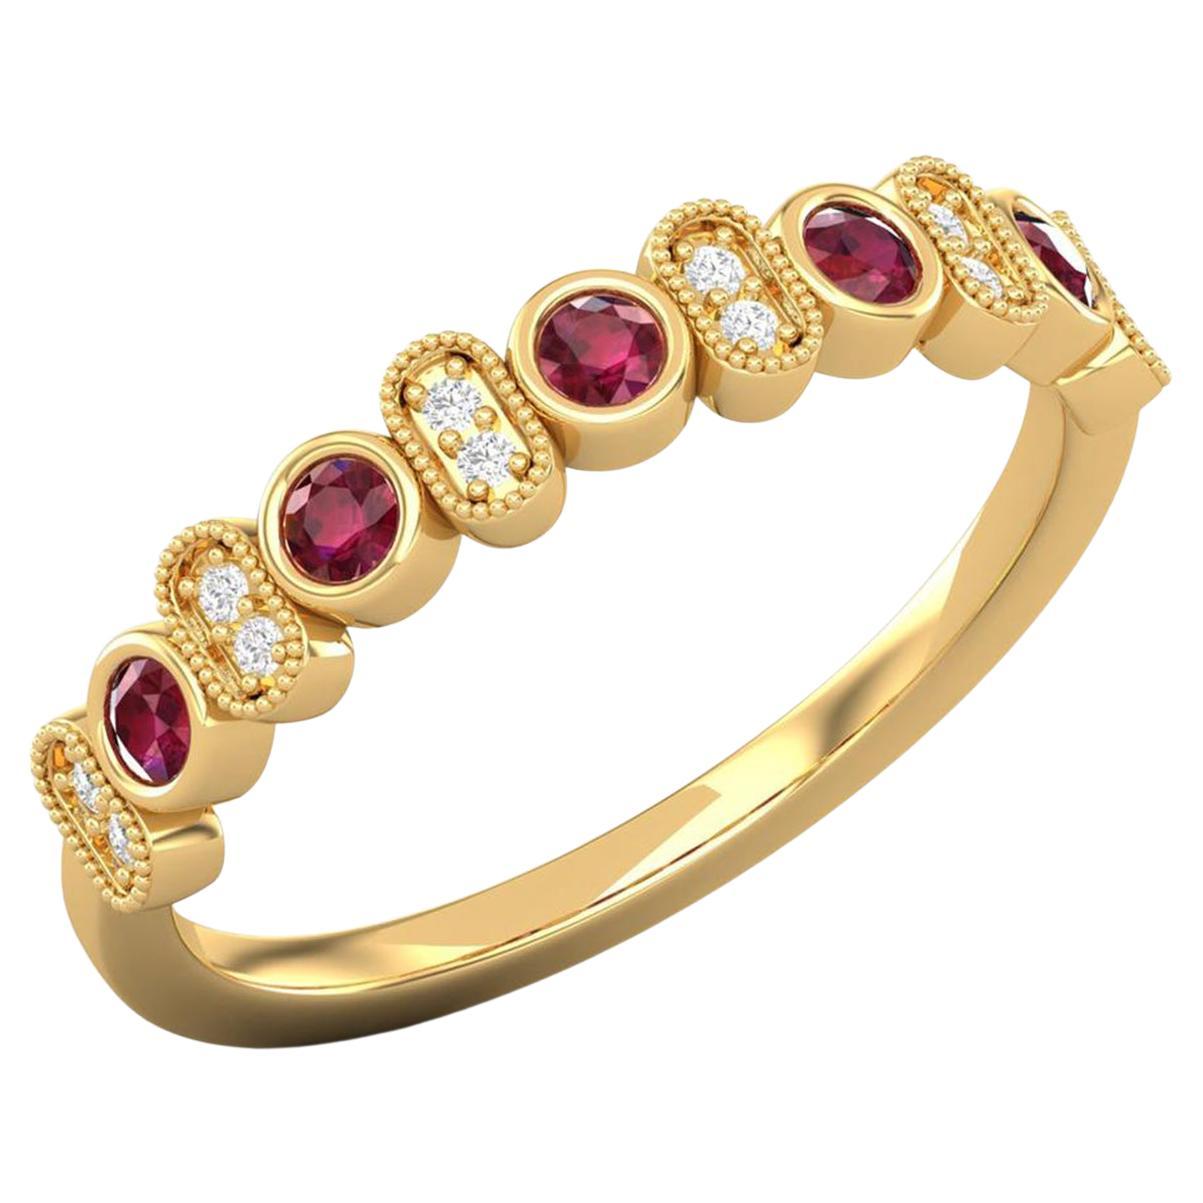 14 Karat Gold 0.1 MM Diamond Ring / 2 MM Ruby Ring / Ring for Her / Cluster Band For Sale